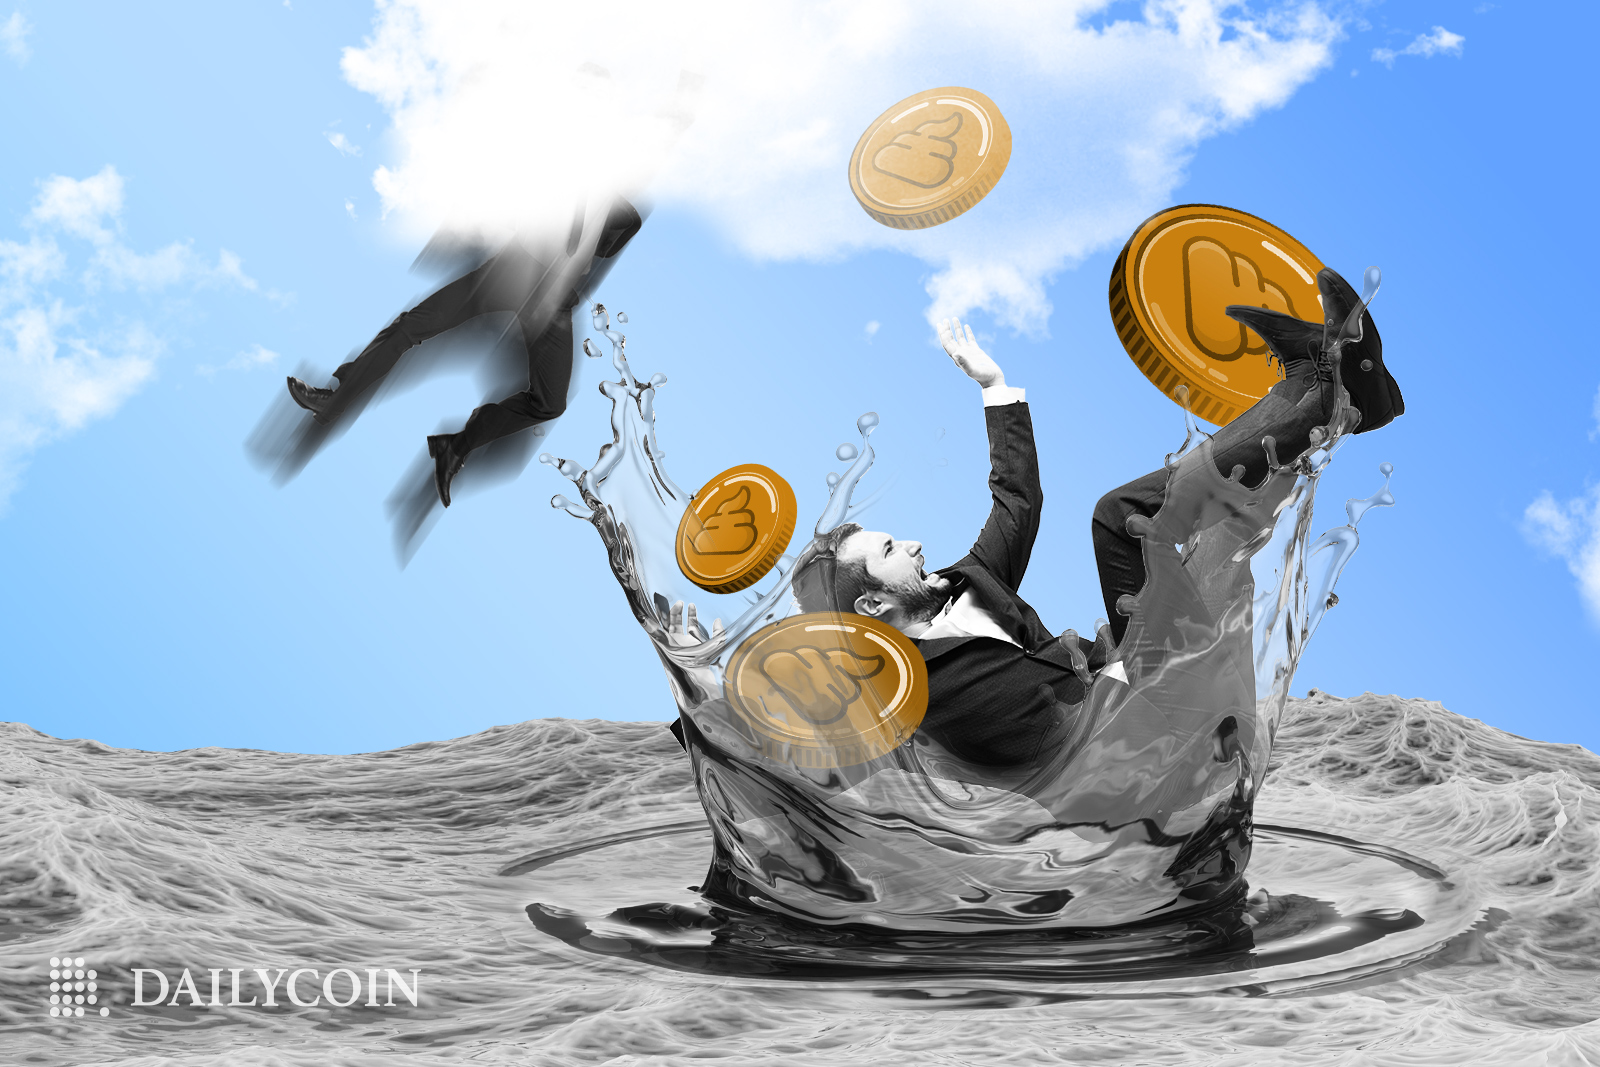 A person falling from the sky into the ocean alongside crypto coins, like in pump and dump scam.